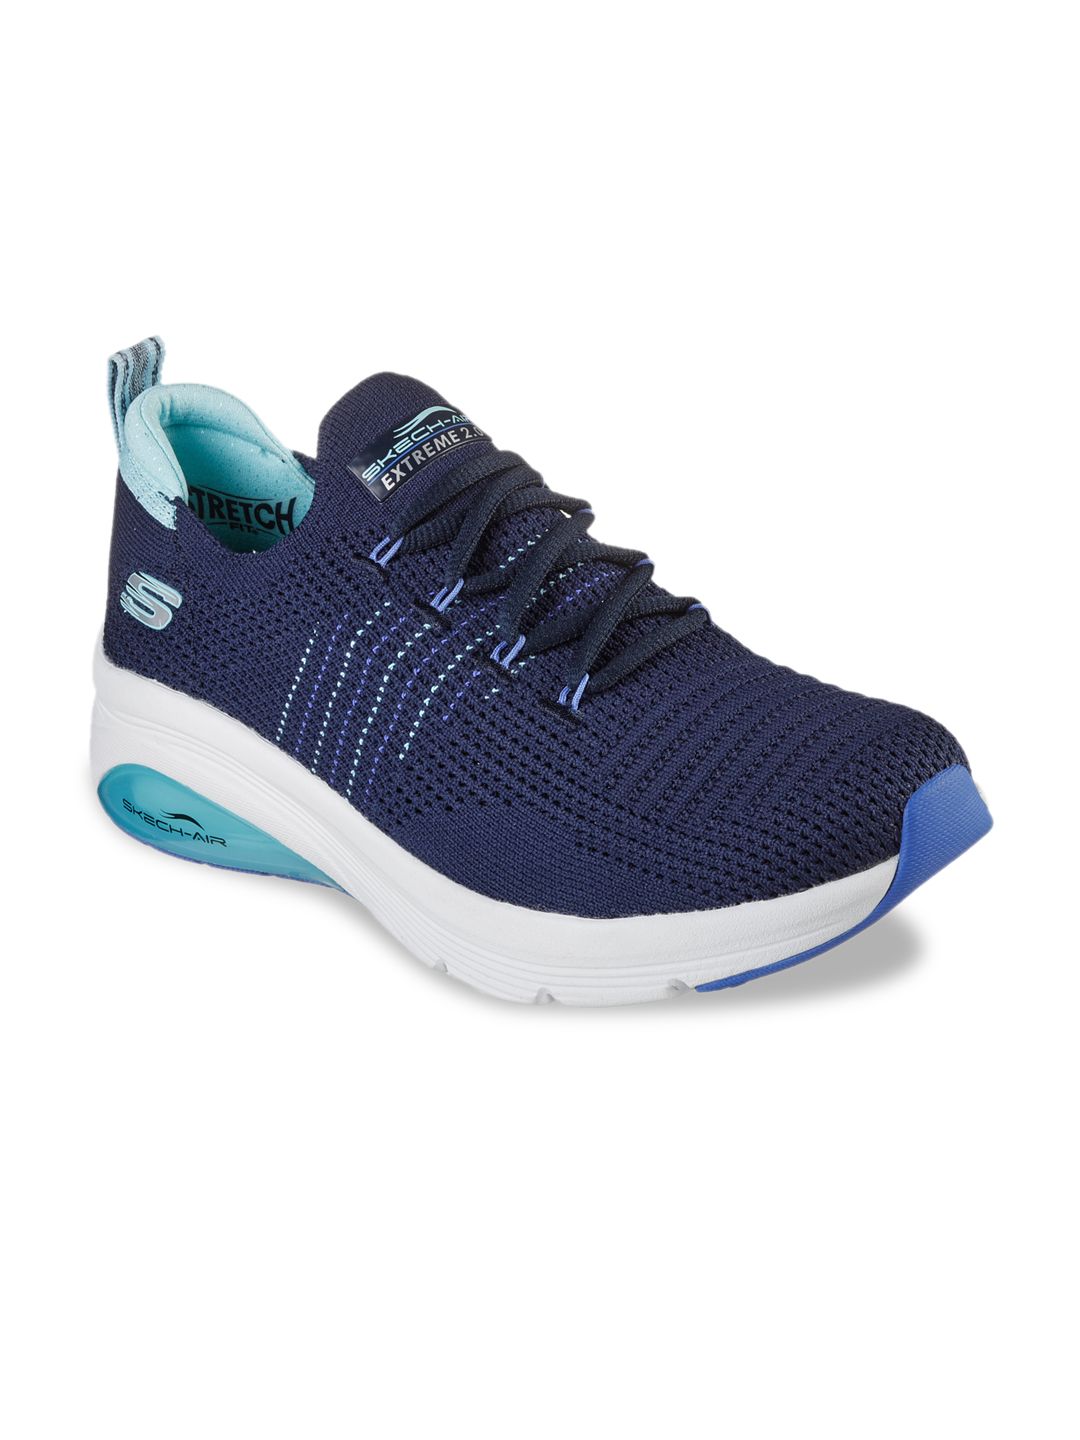 Skechers Women SKECH-AIR EXTREME 2.0-TIMELES Sneakers Price in India